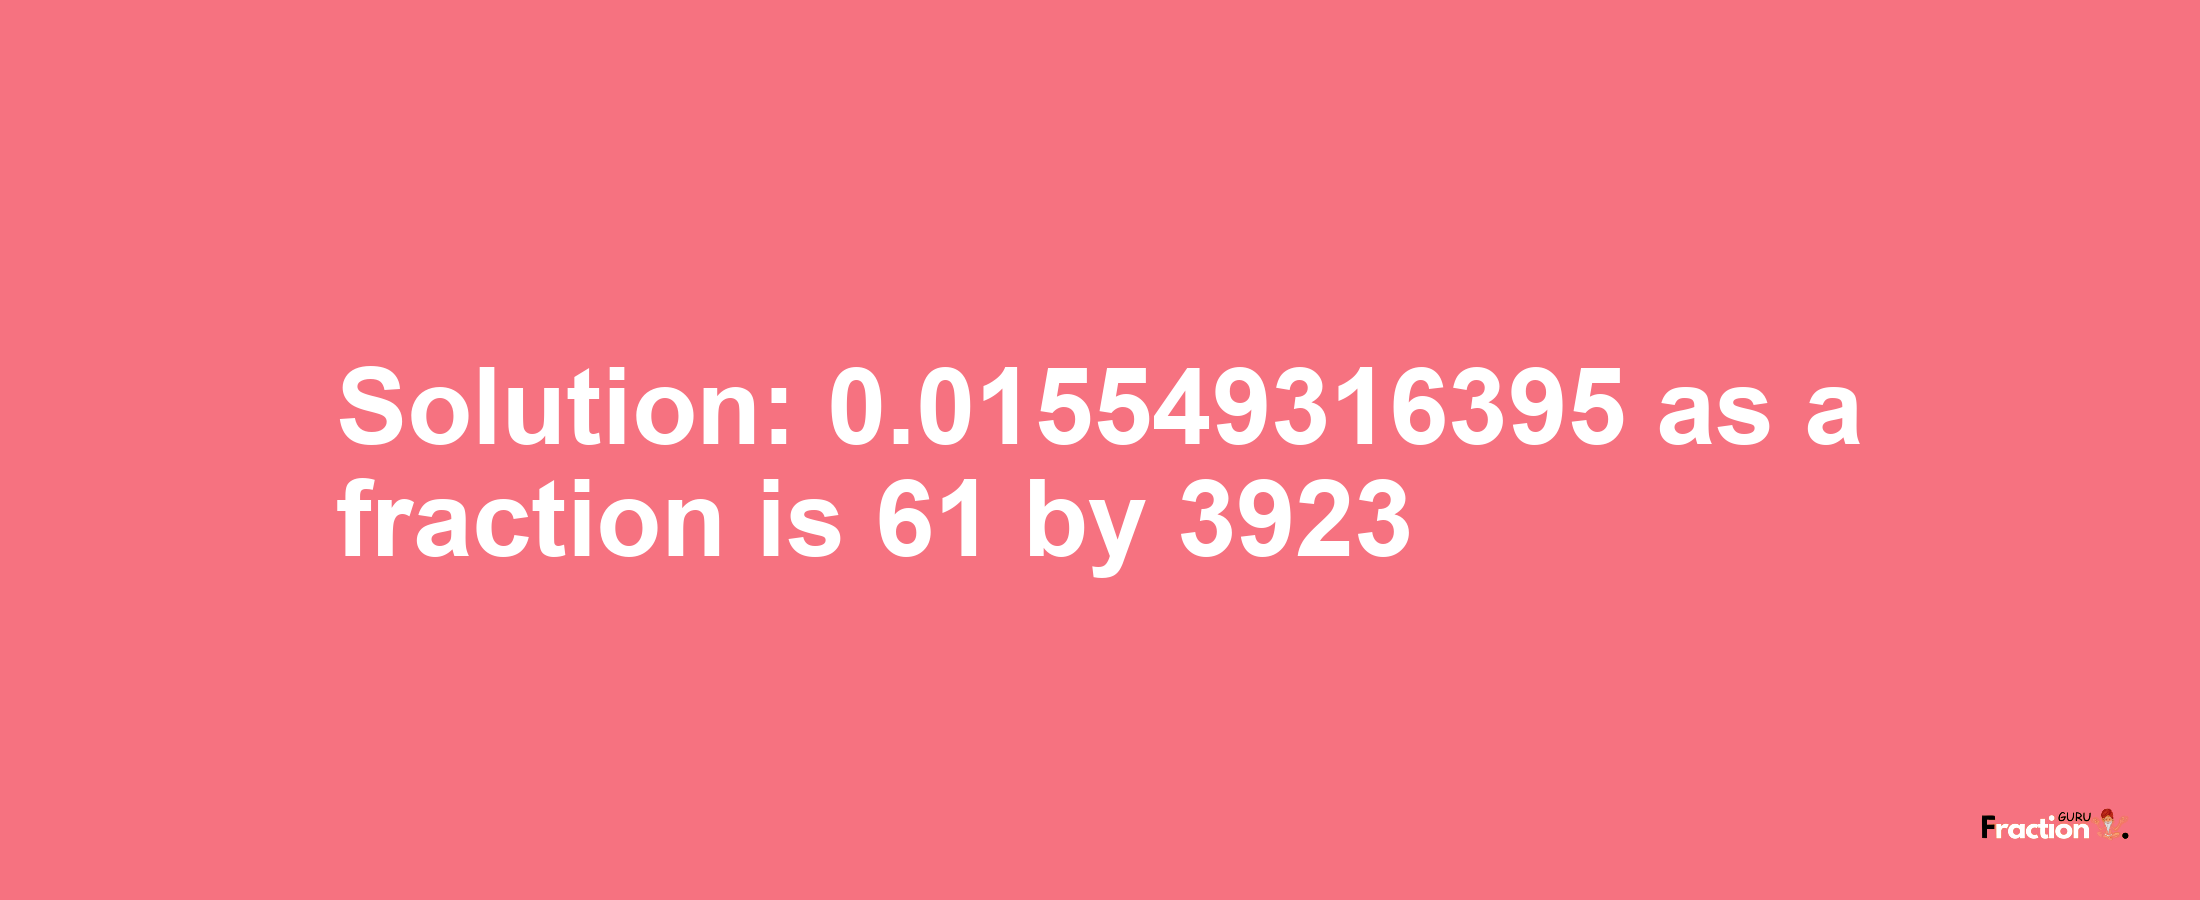 Solution:0.015549316395 as a fraction is 61/3923